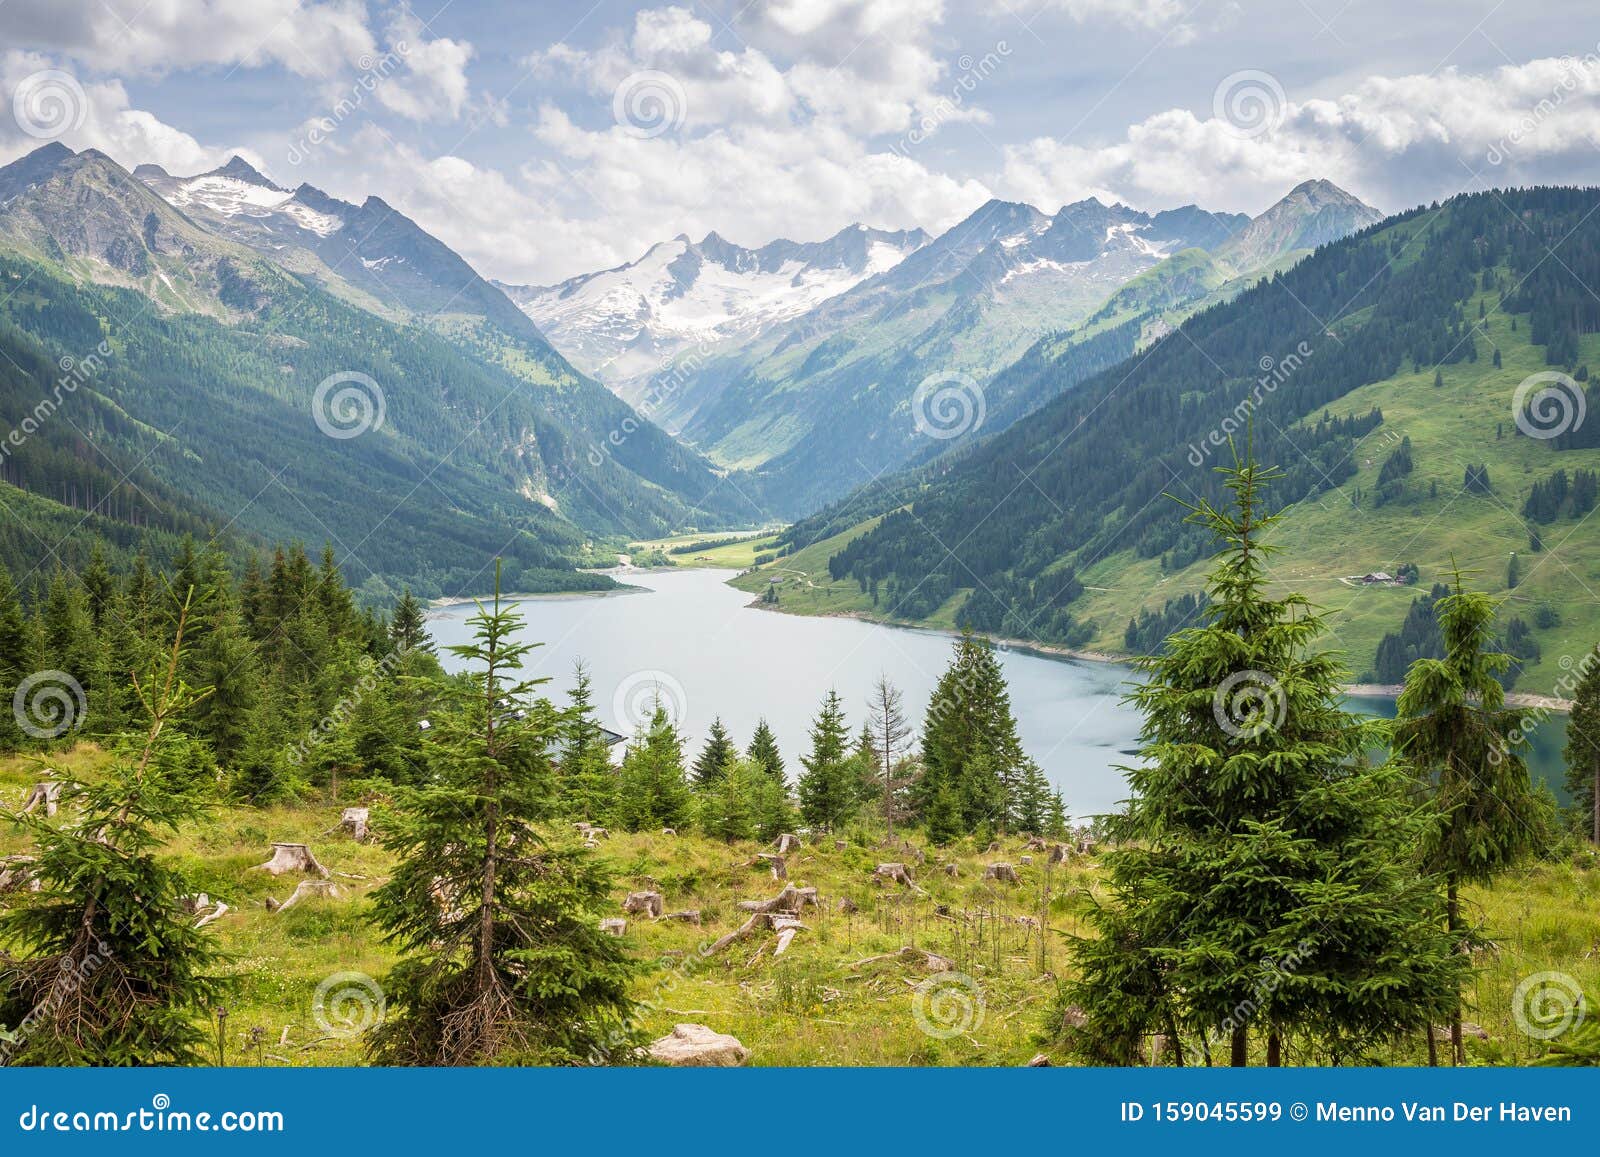 Utålelig bånd Manga Lake and Snowcapped Mountain in Hohe Tauern National Park, Austria Stock  Image - Image of landscape, valley: 159045599